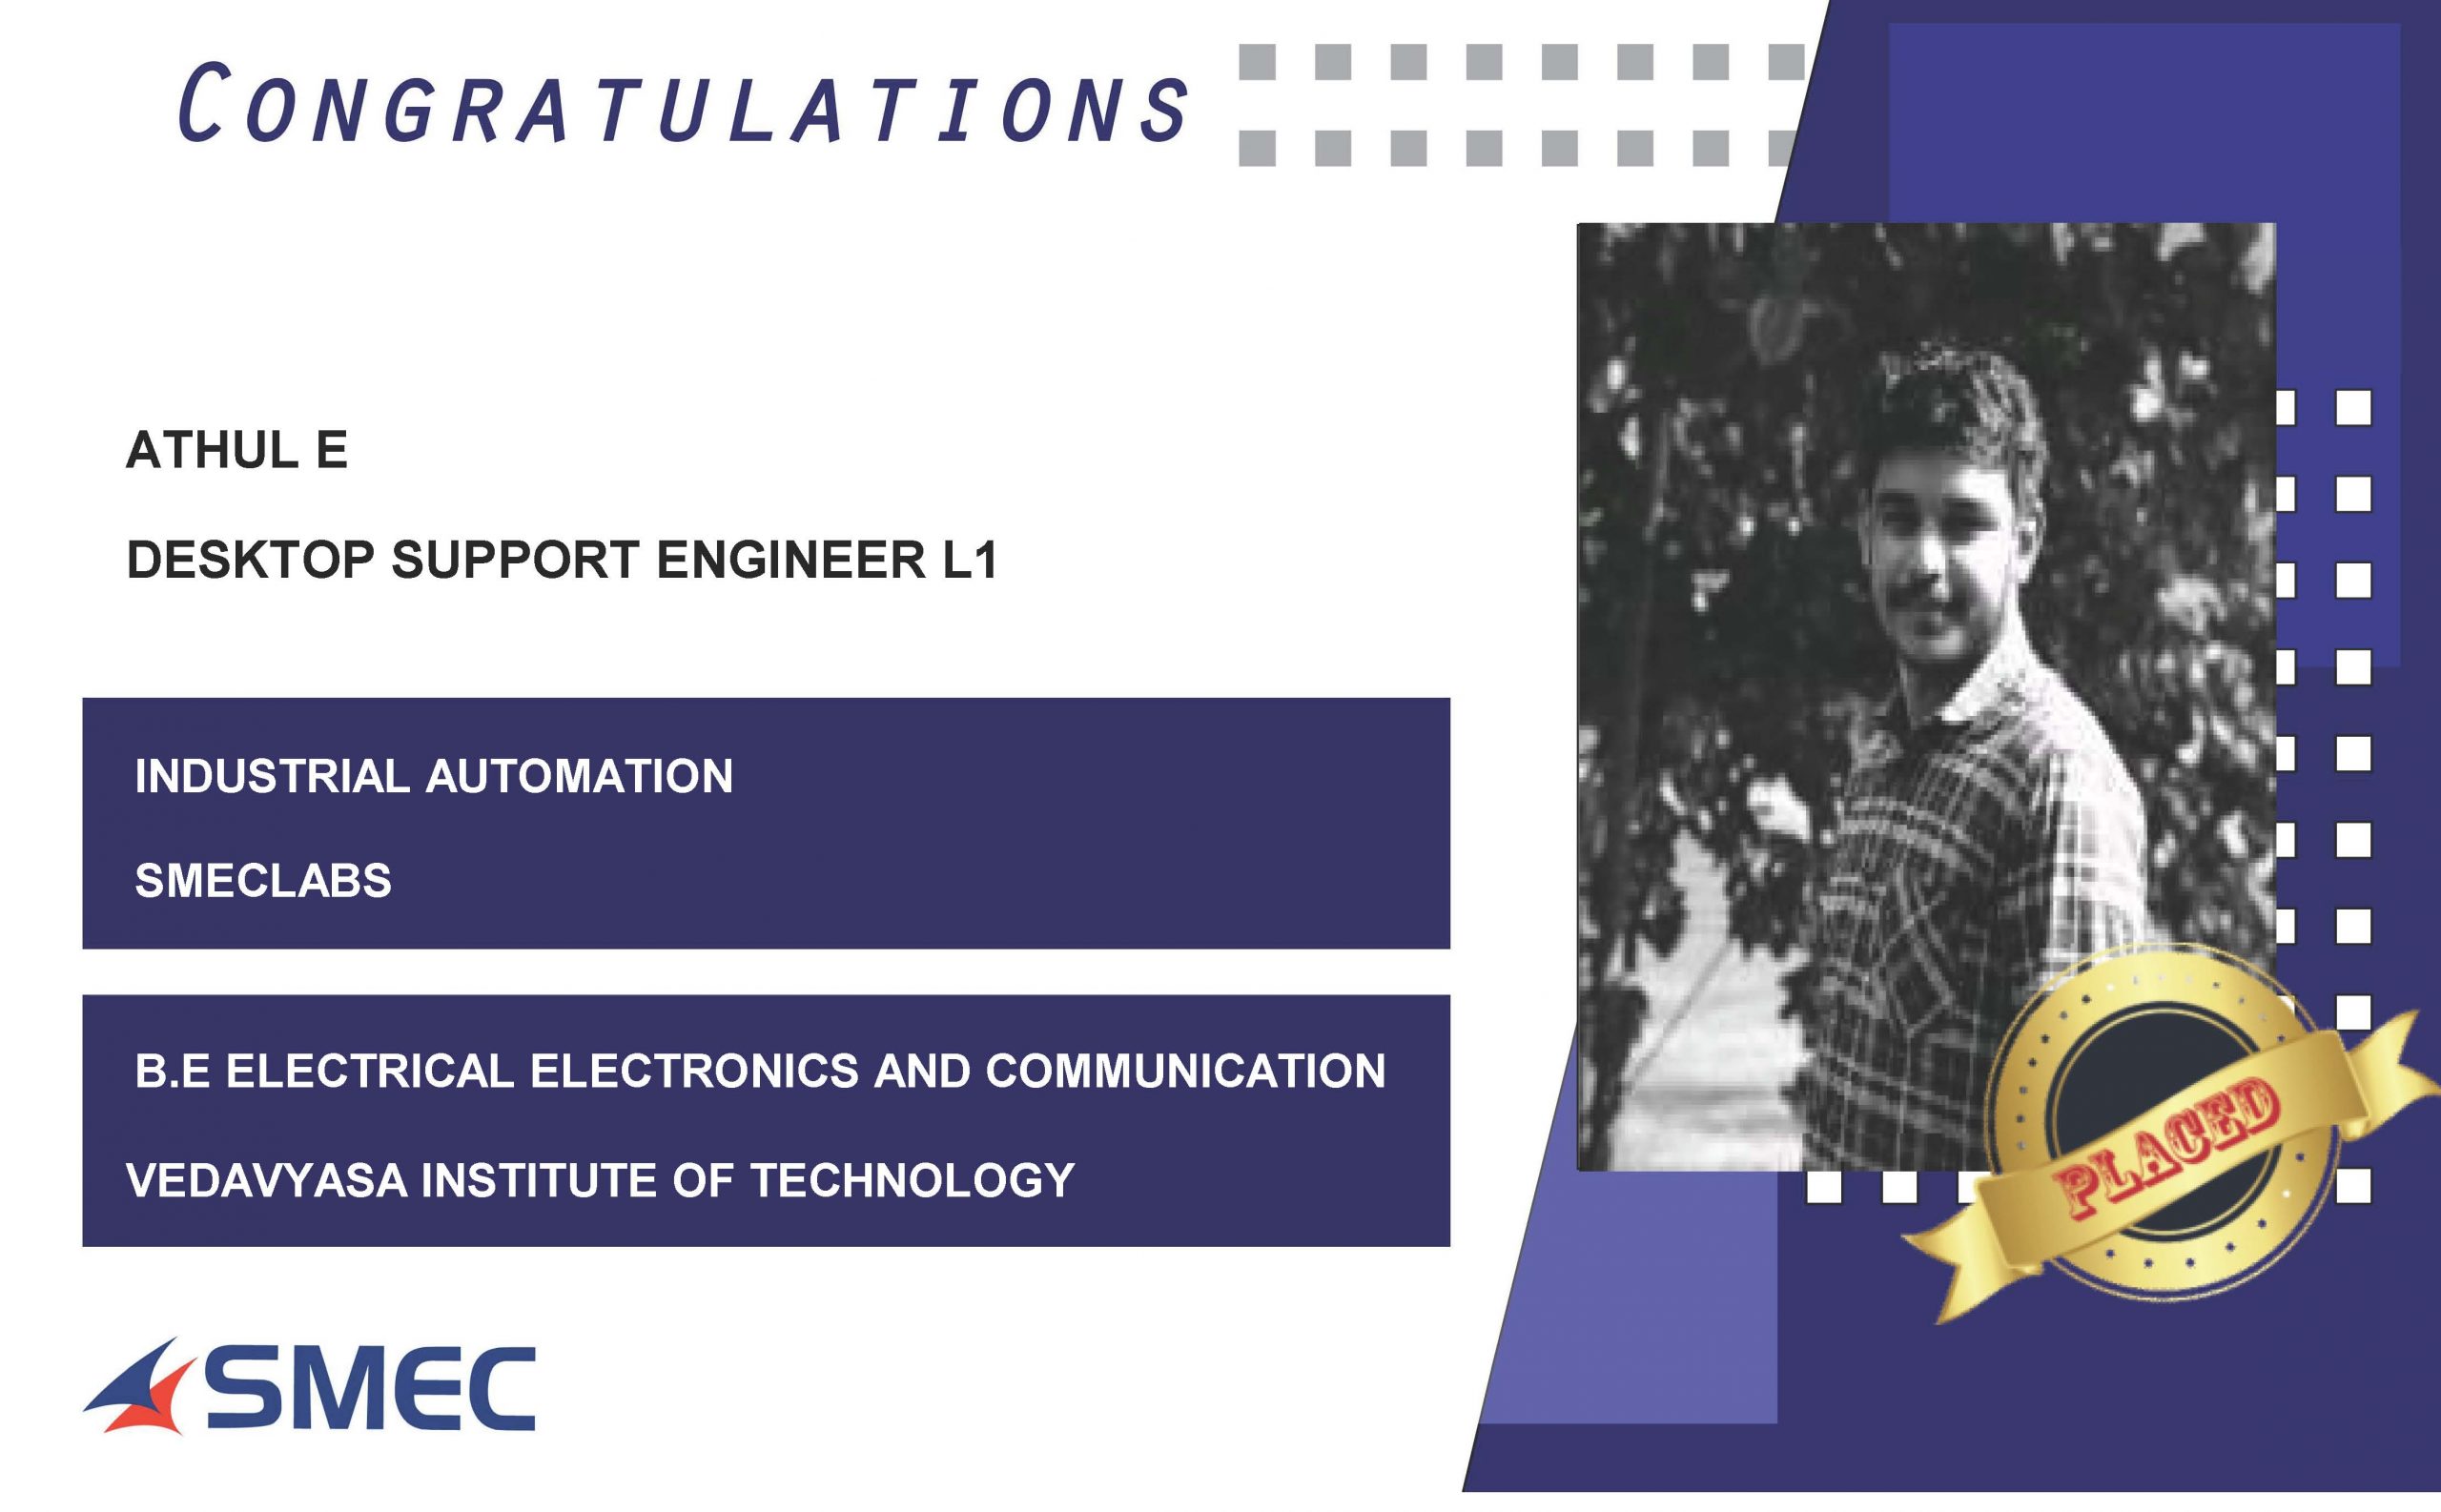 Athul E Placed Successfully as Desktop Support Engineer L1